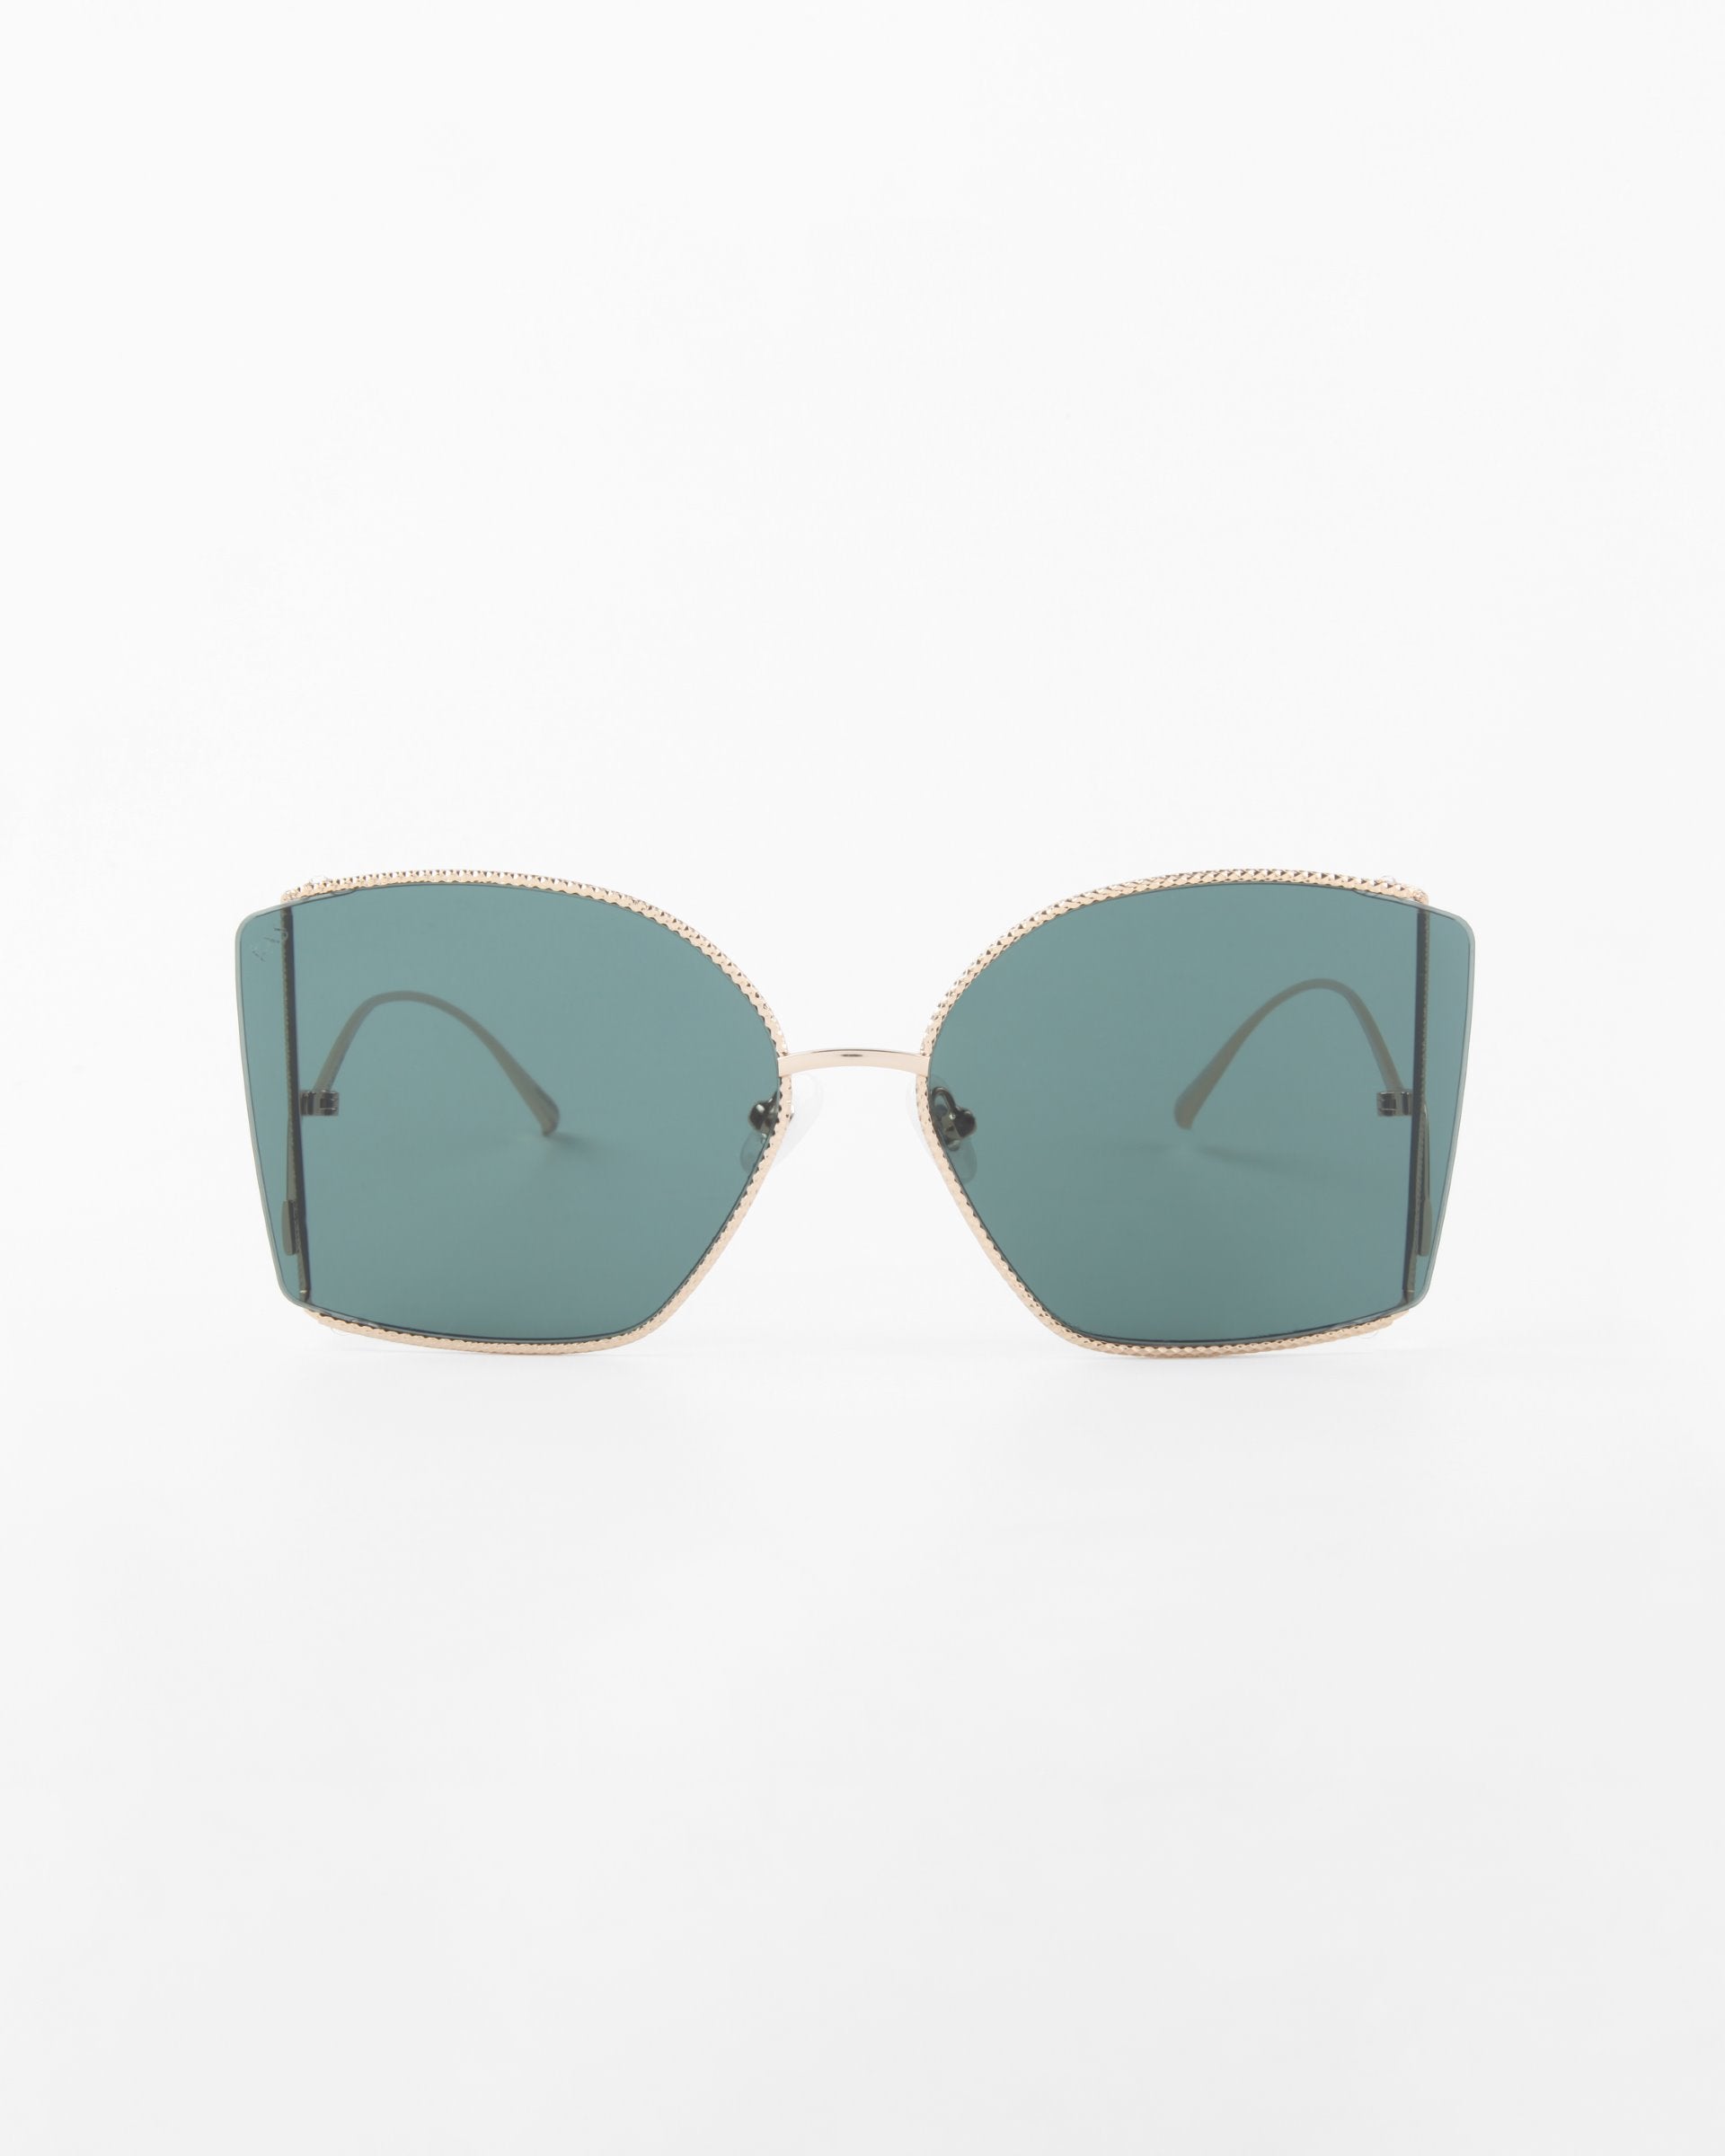 A pair of sunglasses, Dixie by For Art&#39;s Sake®, with oversized square frames and dark green, shatter-resistant nylon lenses. The glasses feature handmade gold-plated frames and gold arms that curve slightly at the ends. The UV protection ensures safety, set against a plain white background.